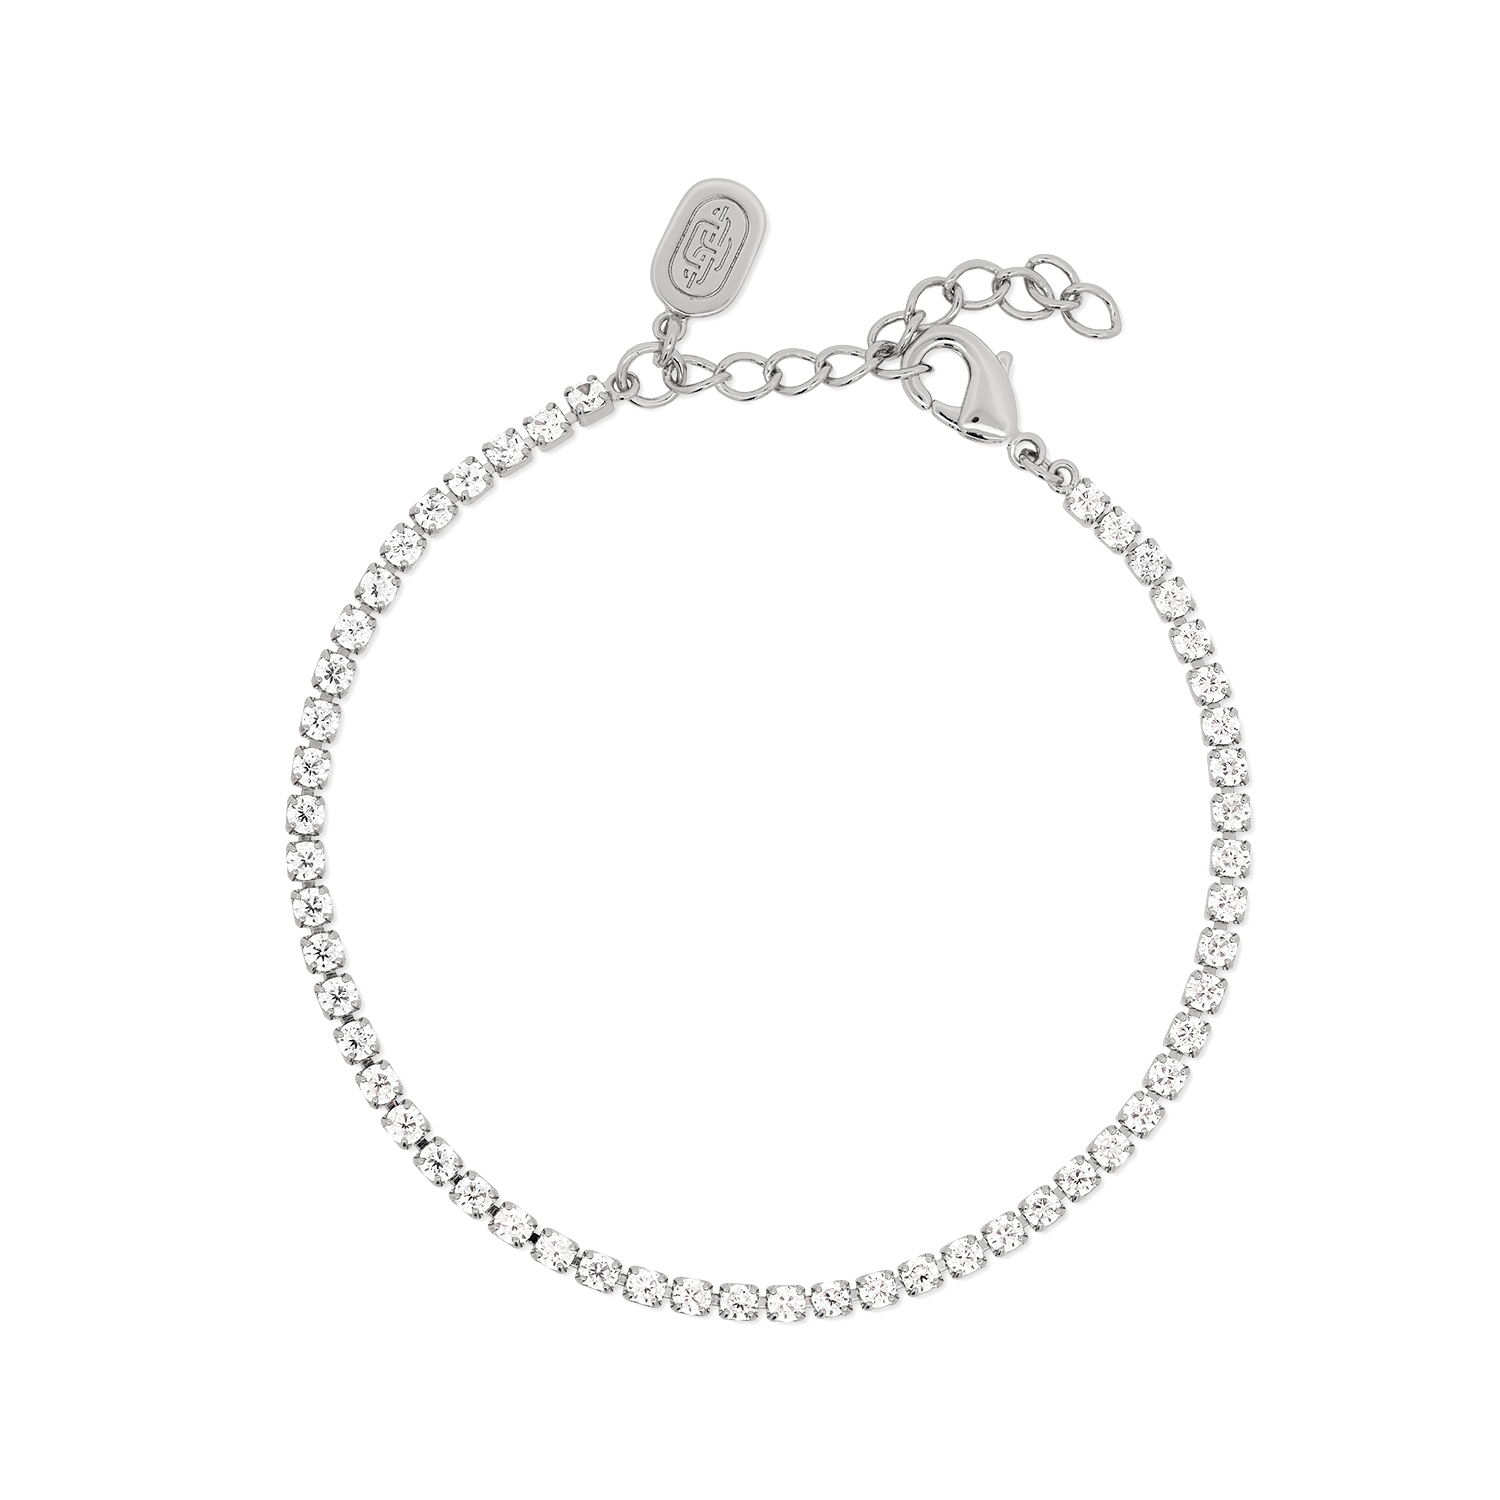 Silver Tennis Bracelet – By Invite Only